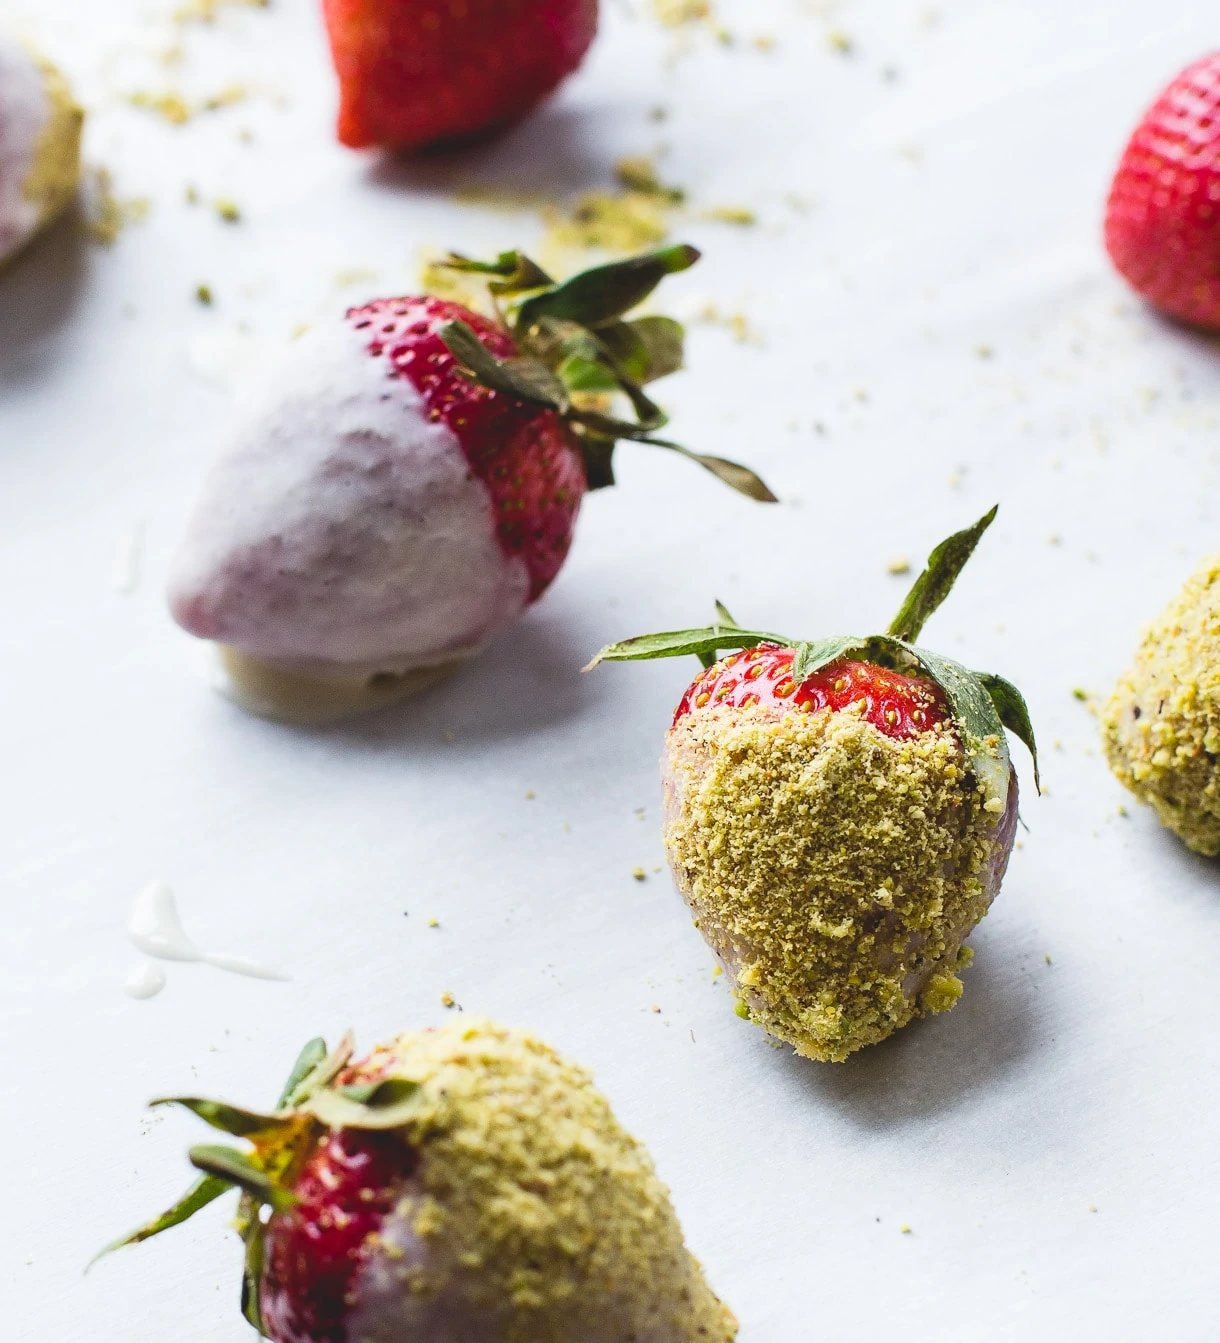 3 Ingredient Coconut Butter Dipped Strawberries with Pistachio Dust {vegan}